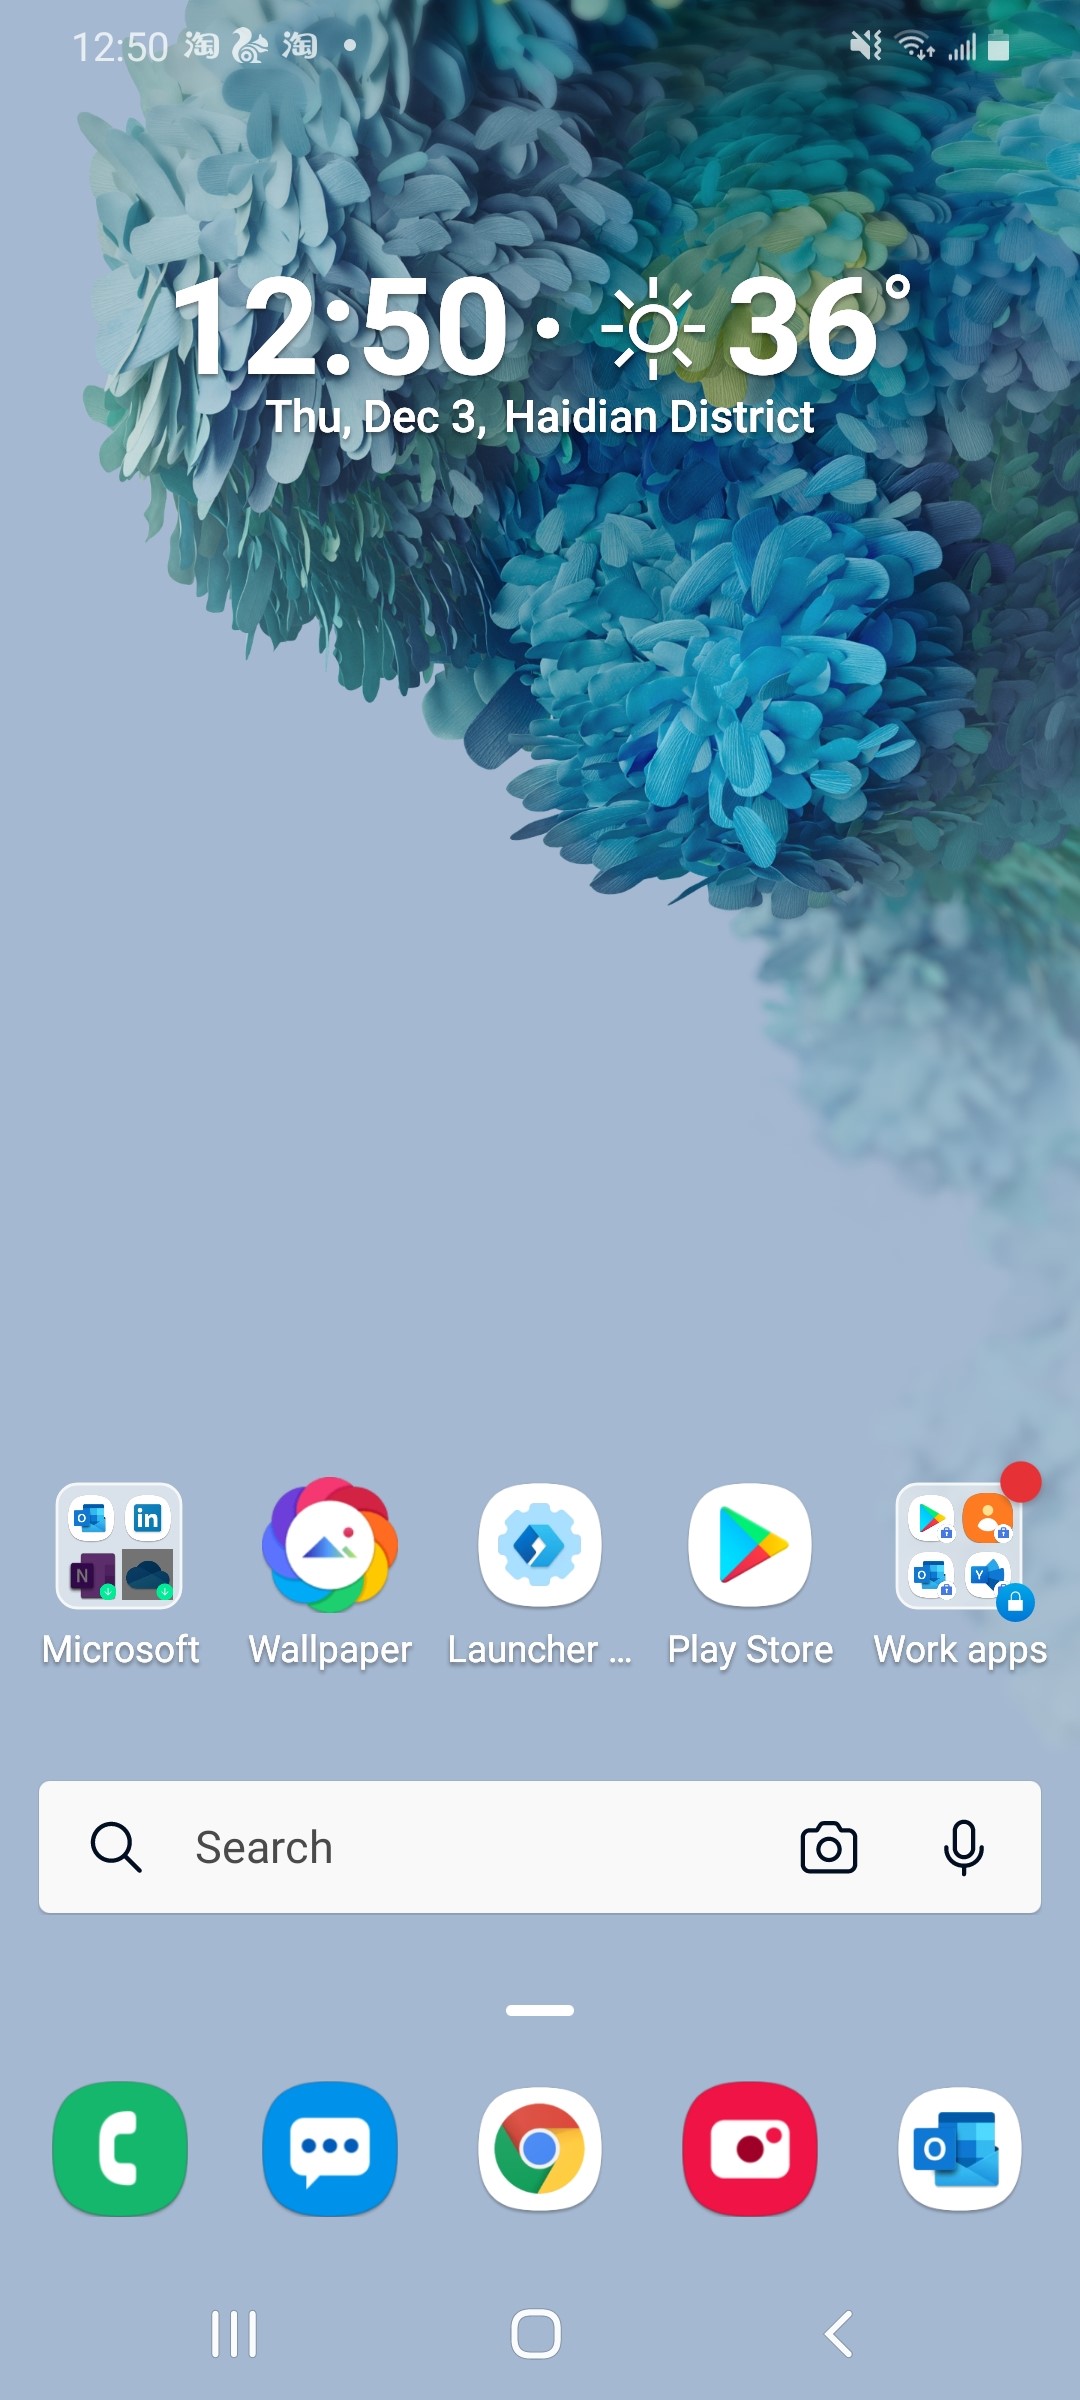 How to use Microsoft Launcher to customize your Android phone | TechRepublic